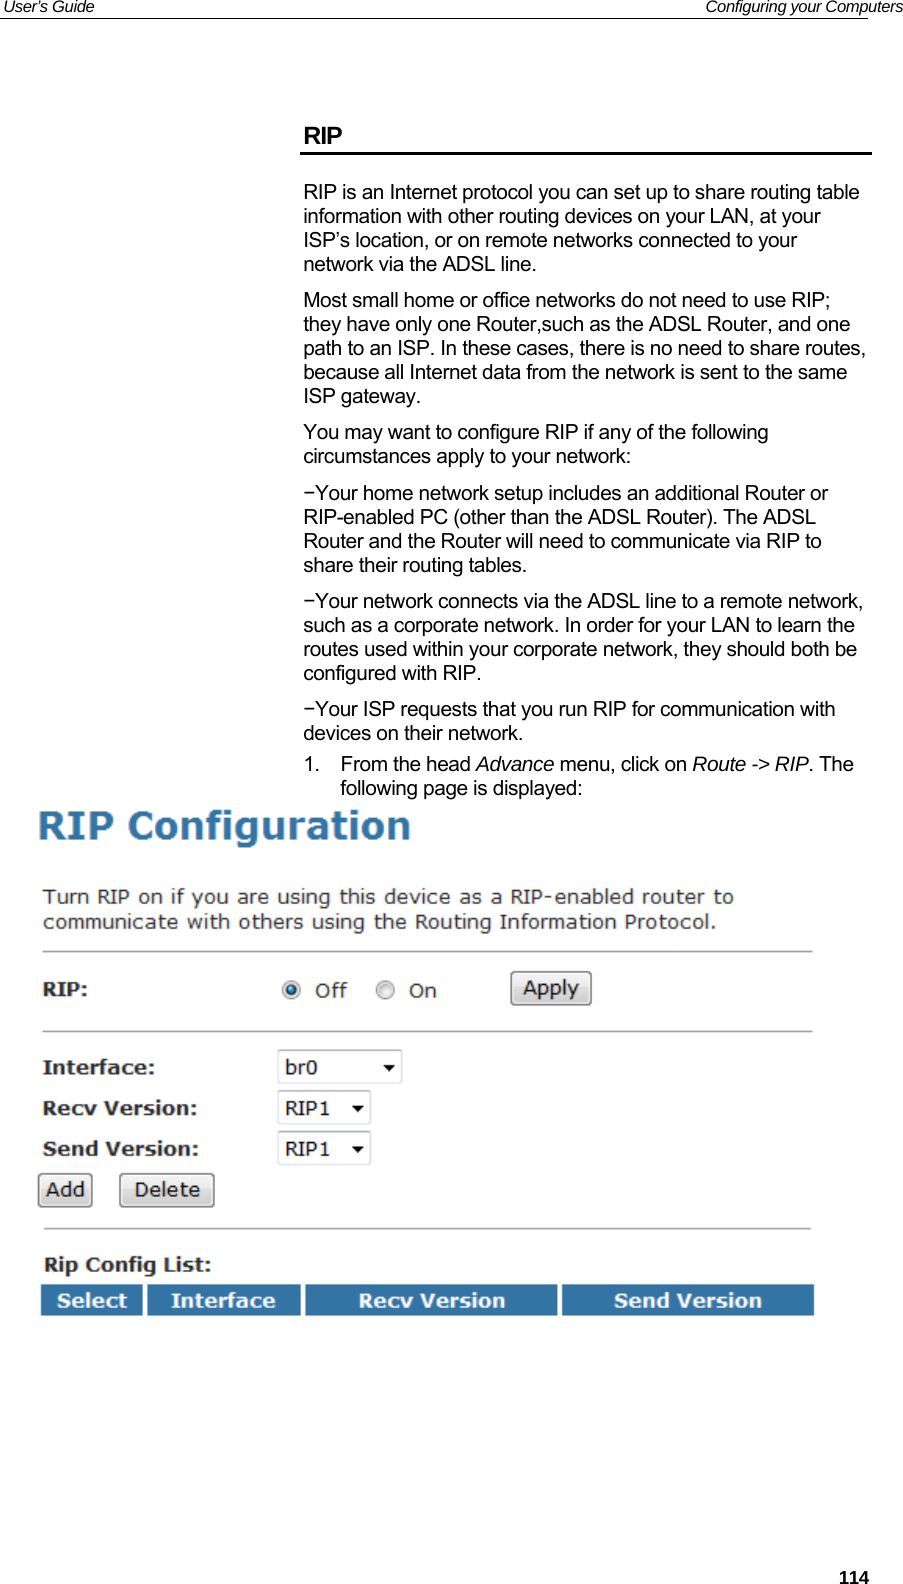 User’s Guide   Configuring your Computers  RIP RIP is an Internet protocol you can set up to share routing table information with other routing devices on your LAN, at your ISP’s location, or on remote networks connected to your network via the ADSL line. Most small home or office networks do not need to use RIP; they have only one Router,such as the ADSL Router, and one path to an ISP. In these cases, there is no need to share routes, because all Internet data from the network is sent to the same ISP gateway. You may want to configure RIP if any of the following circumstances apply to your network: −Your home network setup includes an additional Router or RIP-enabled PC (other than the ADSL Router). The ADSL Router and the Router will need to communicate via RIP to share their routing tables. −Your network connects via the ADSL line to a remote network, such as a corporate network. In order for your LAN to learn the routes used within your corporate network, they should both be configured with RIP. −Your ISP requests that you run RIP for communication with devices on their network. 1. From the head Advance menu, click on Route -&gt; RIP. The following page is displayed:        114